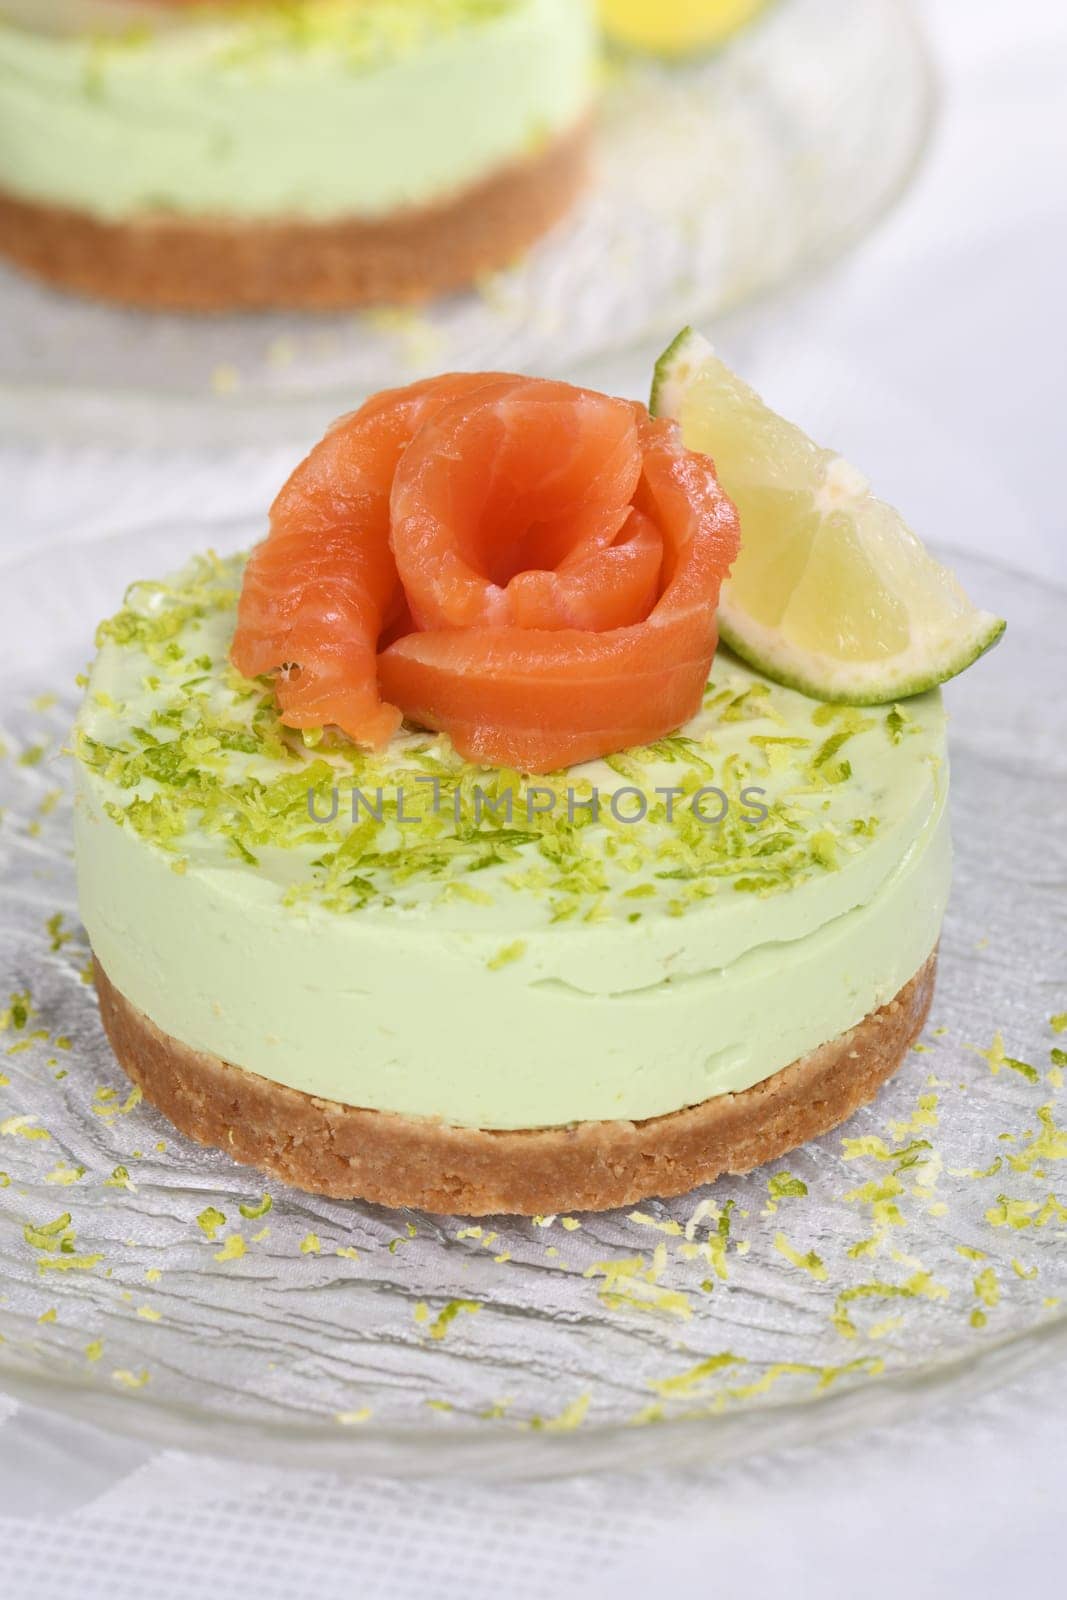 Avocado timbale with salmon by Apolonia